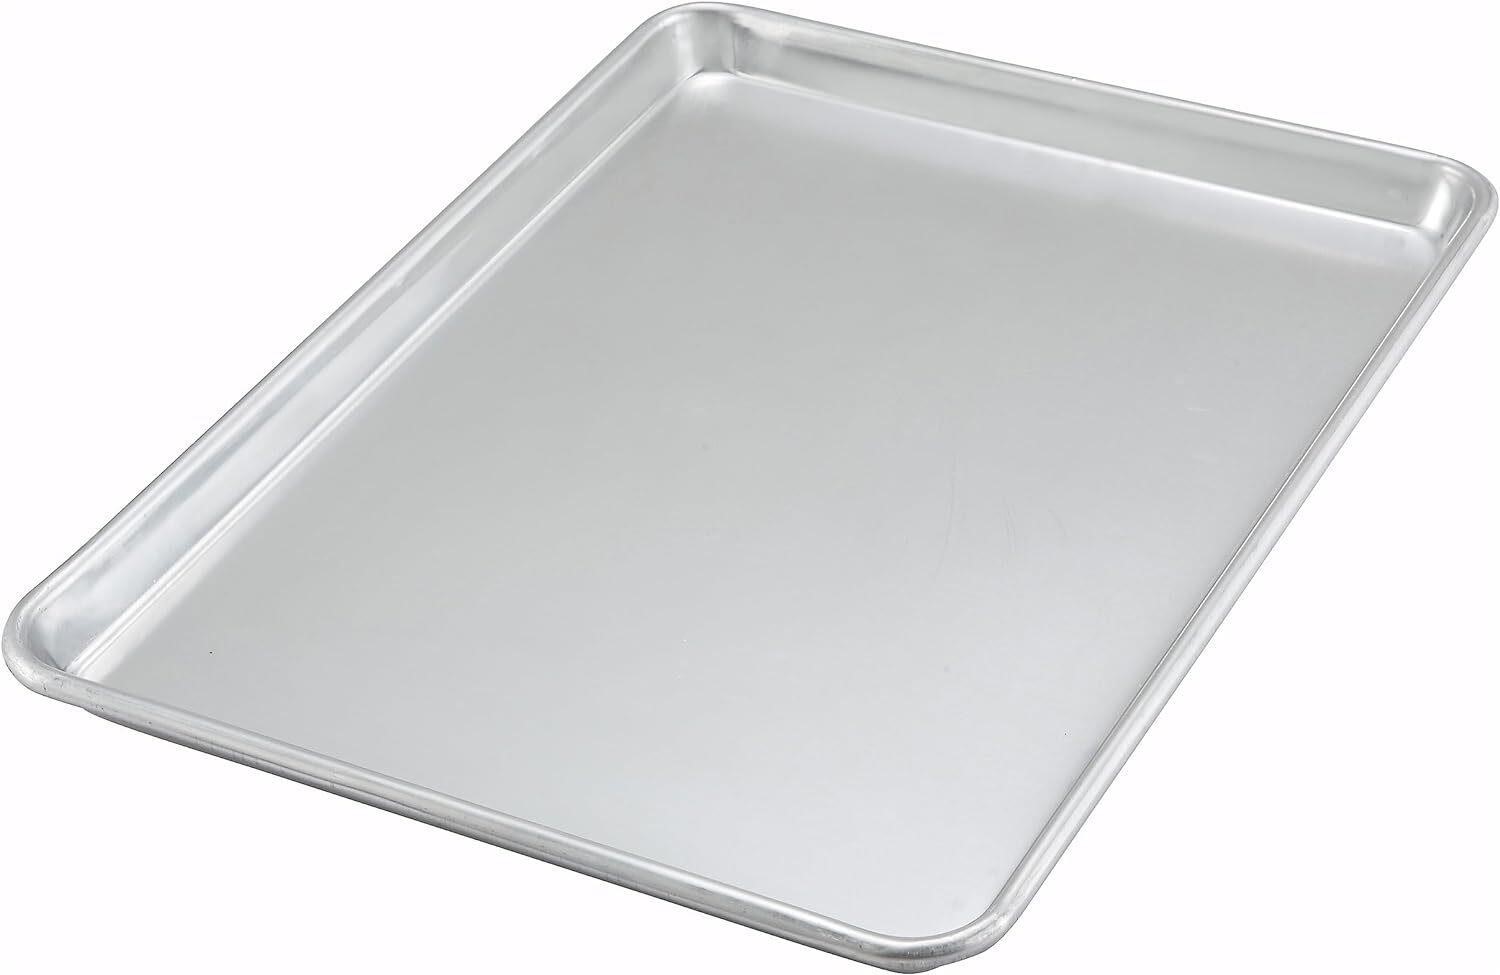 Lot of 3 Winware by Winco Sheet Pan  1 Pack Silver